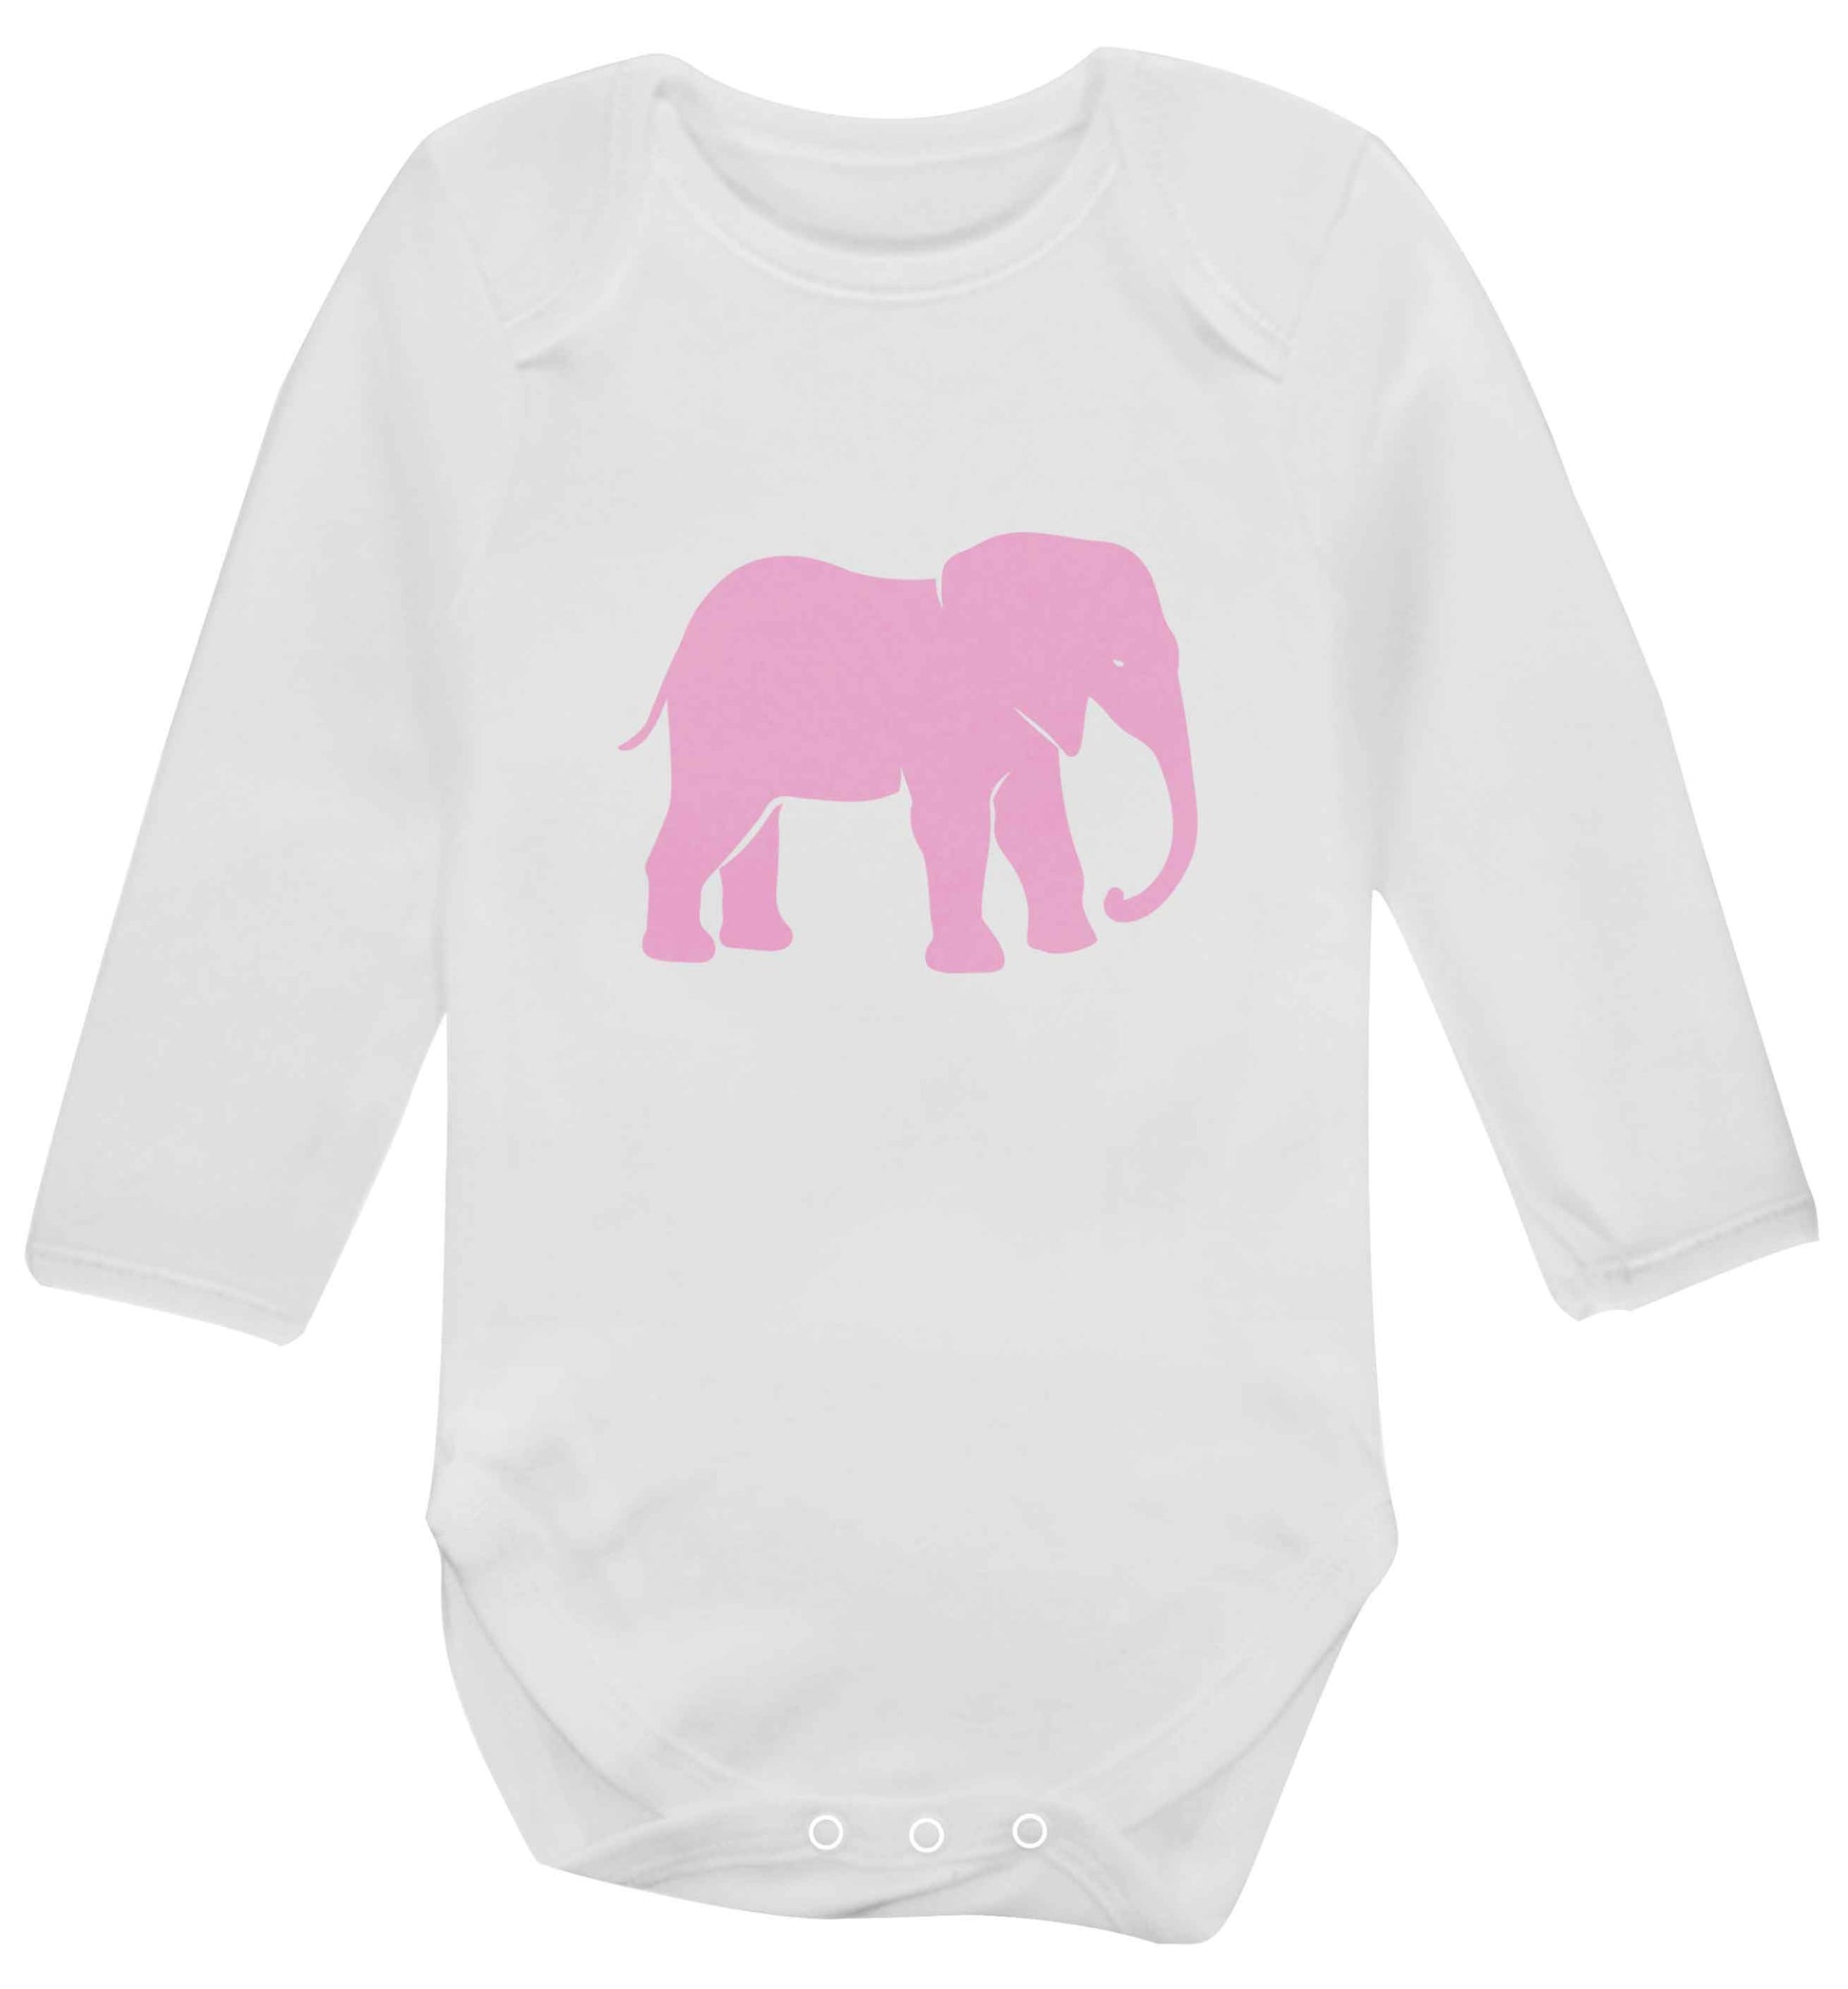 Pink elephant baby vest long sleeved white 6-12 months